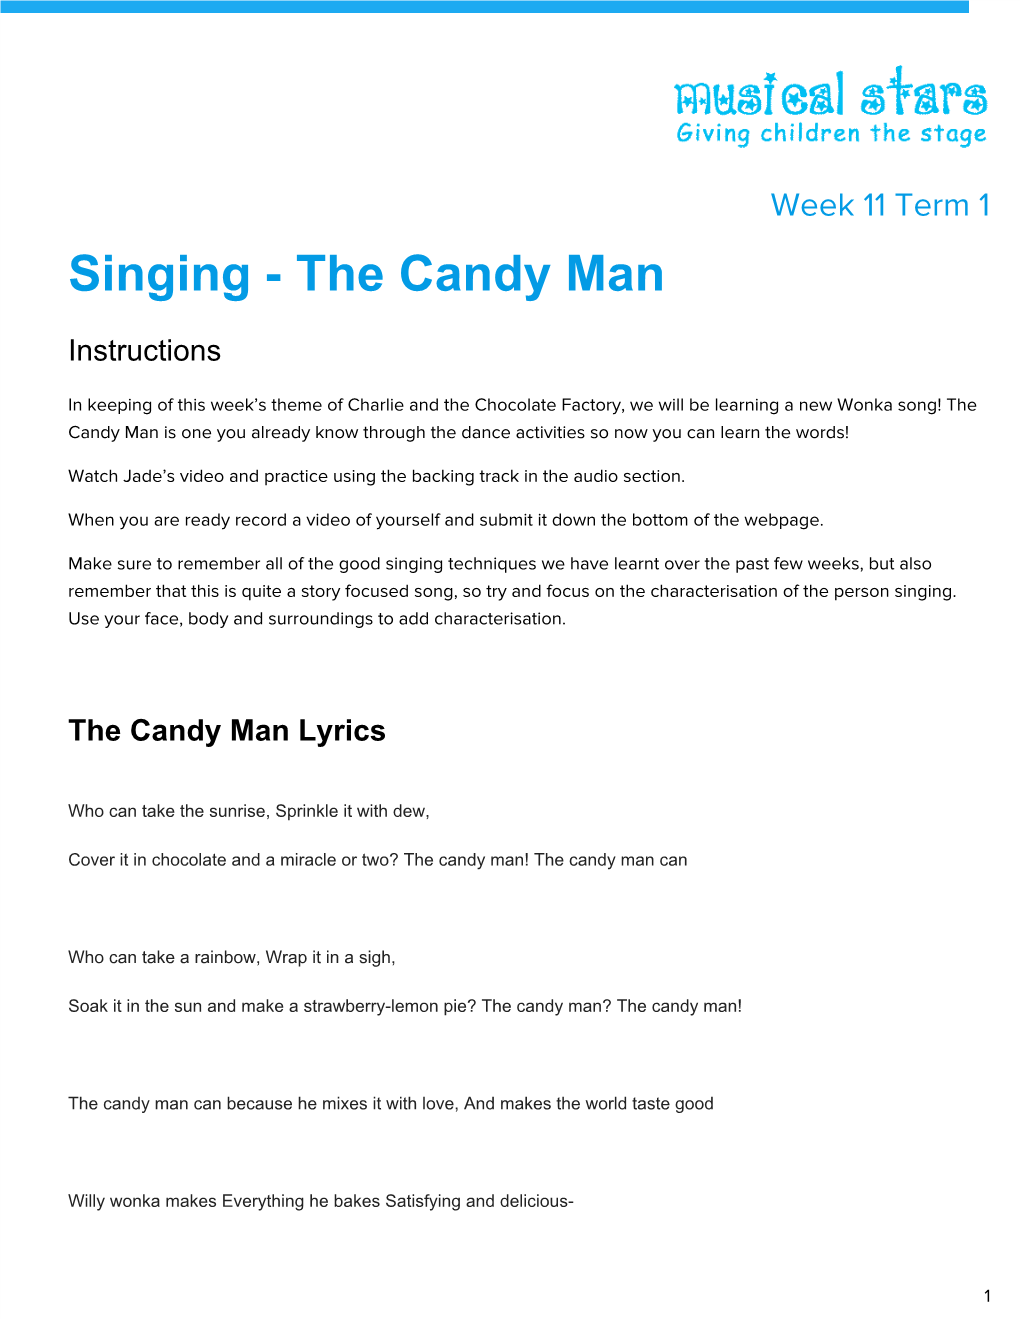 Singing - the Candy Man